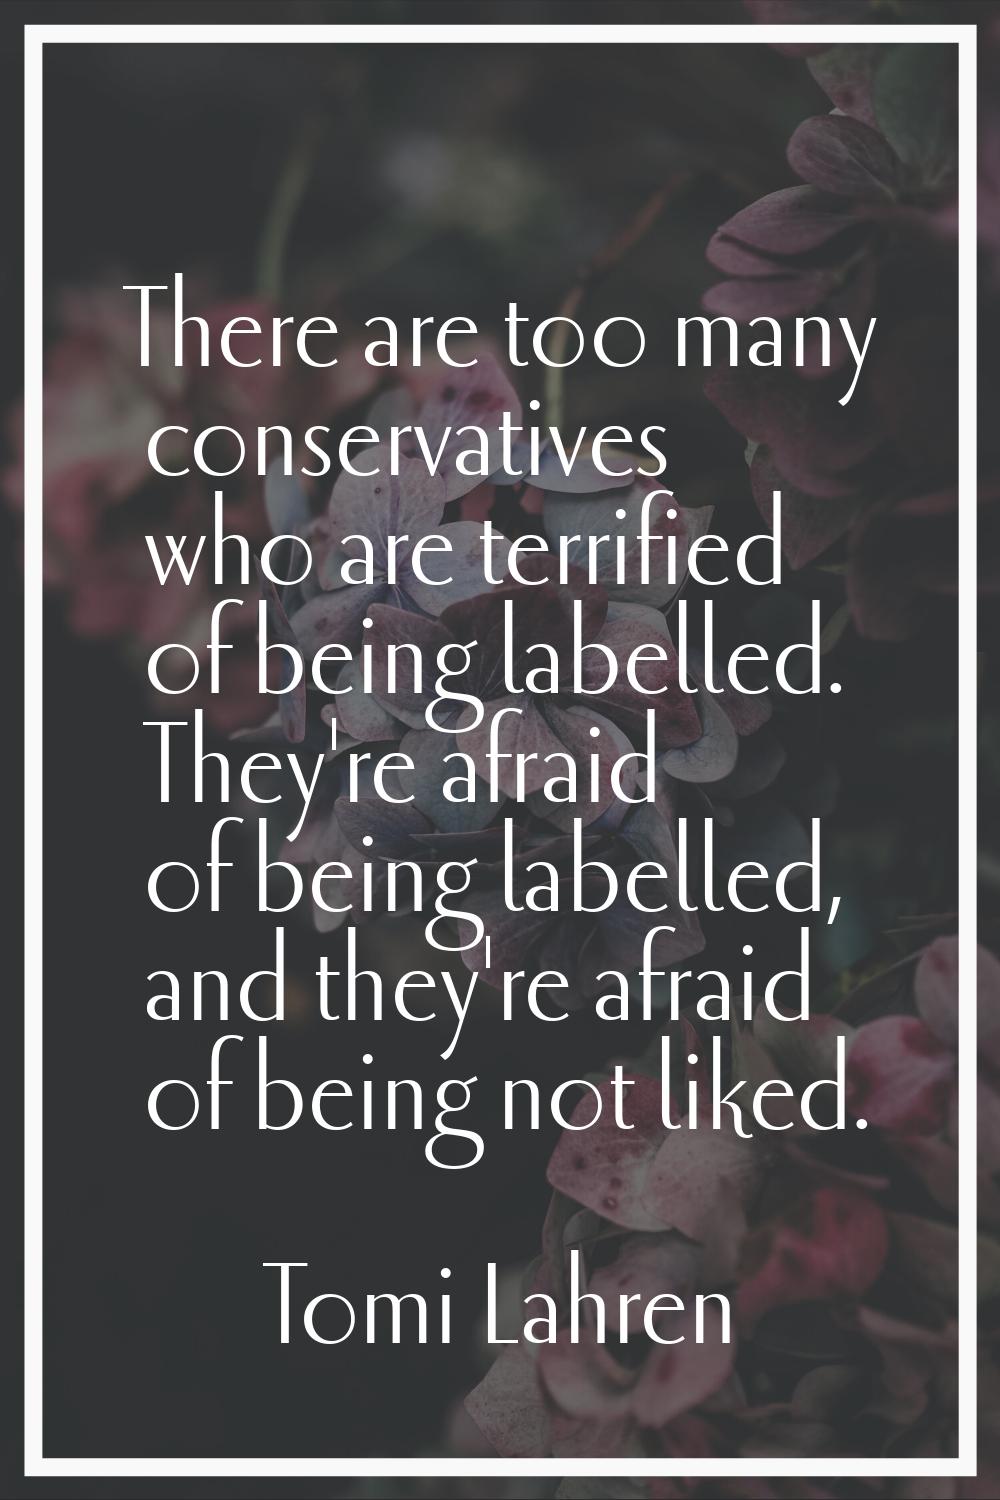 There are too many conservatives who are terrified of being labelled. They're afraid of being label